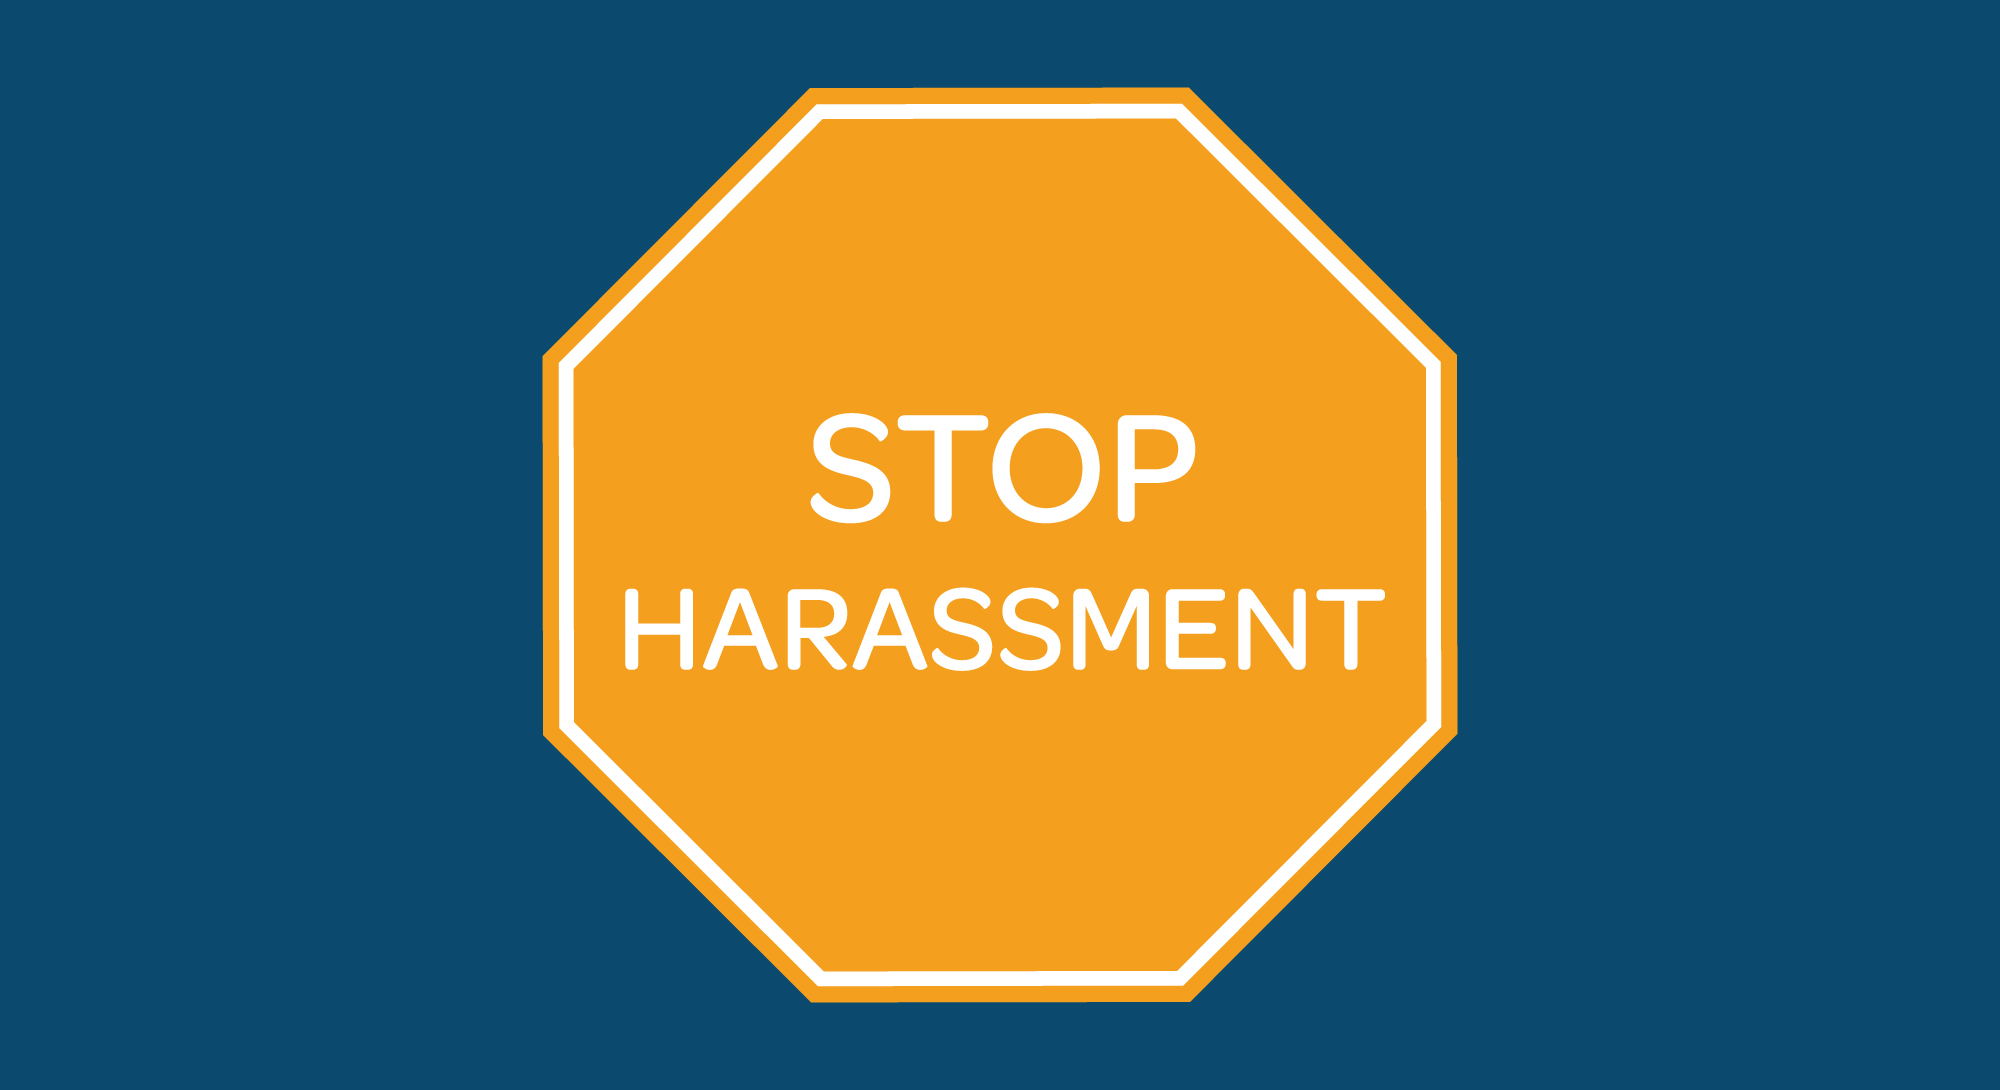 Stop Harassment sign